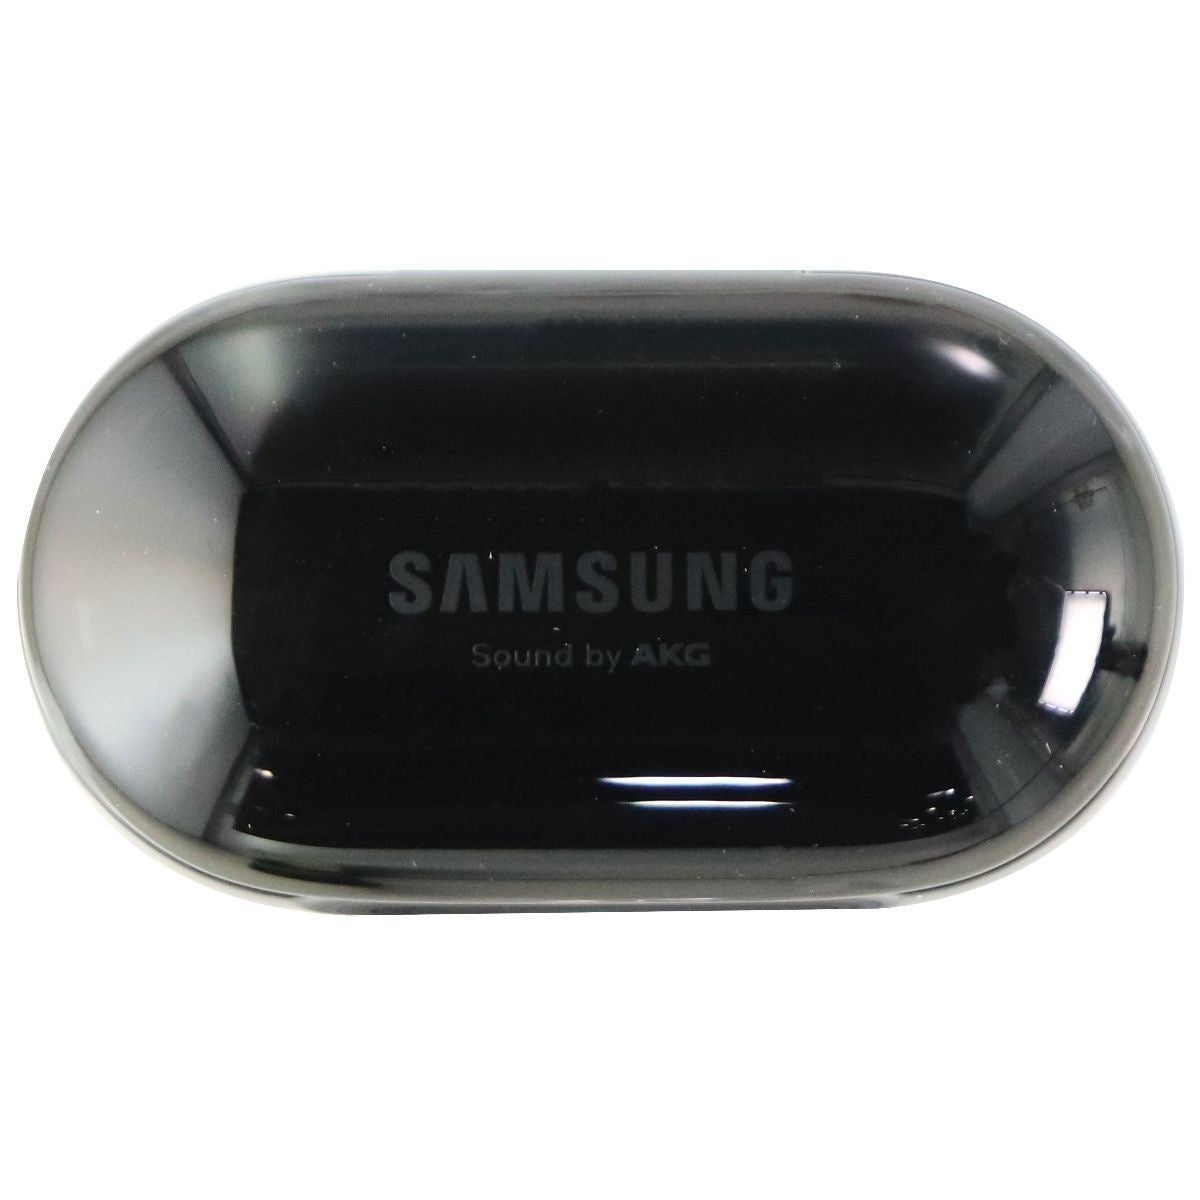 Samsung Charging Cradle Dock Charger Case for Galaxy (Buds+) - Black (EP-QR175) iPod, Audio Player Accessories - Cases, Covers & Skins Samsung    - Simple Cell Bulk Wholesale Pricing - USA Seller